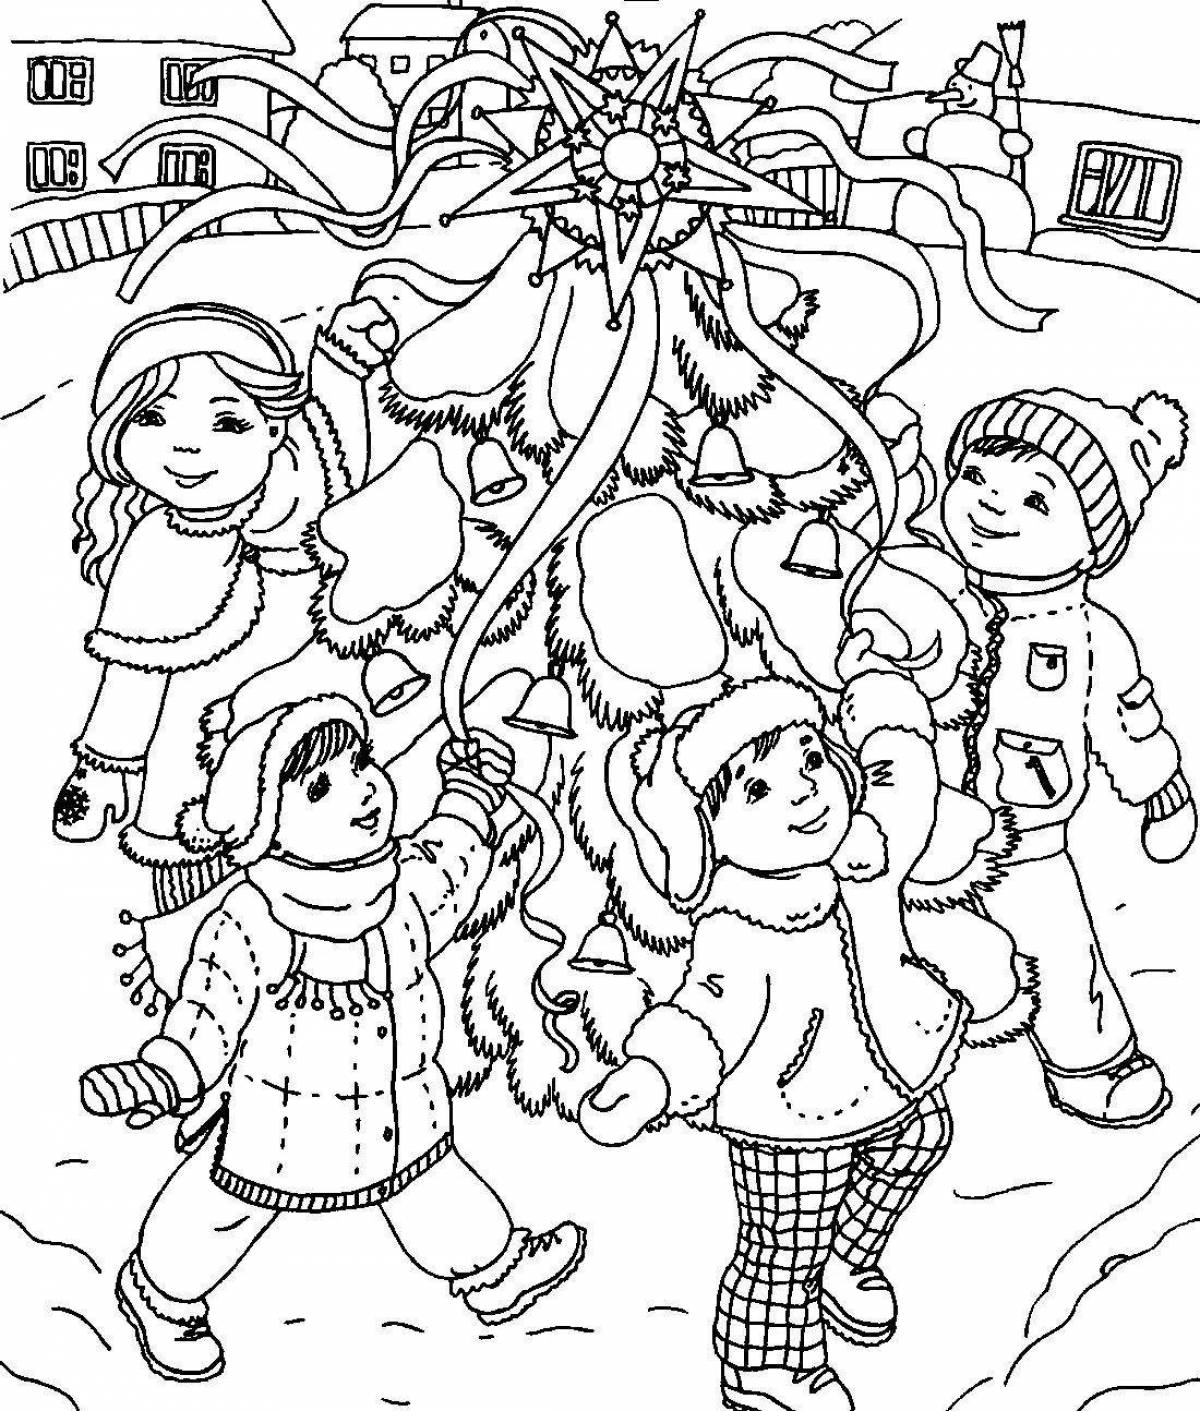 Coloring page jubilant hymns